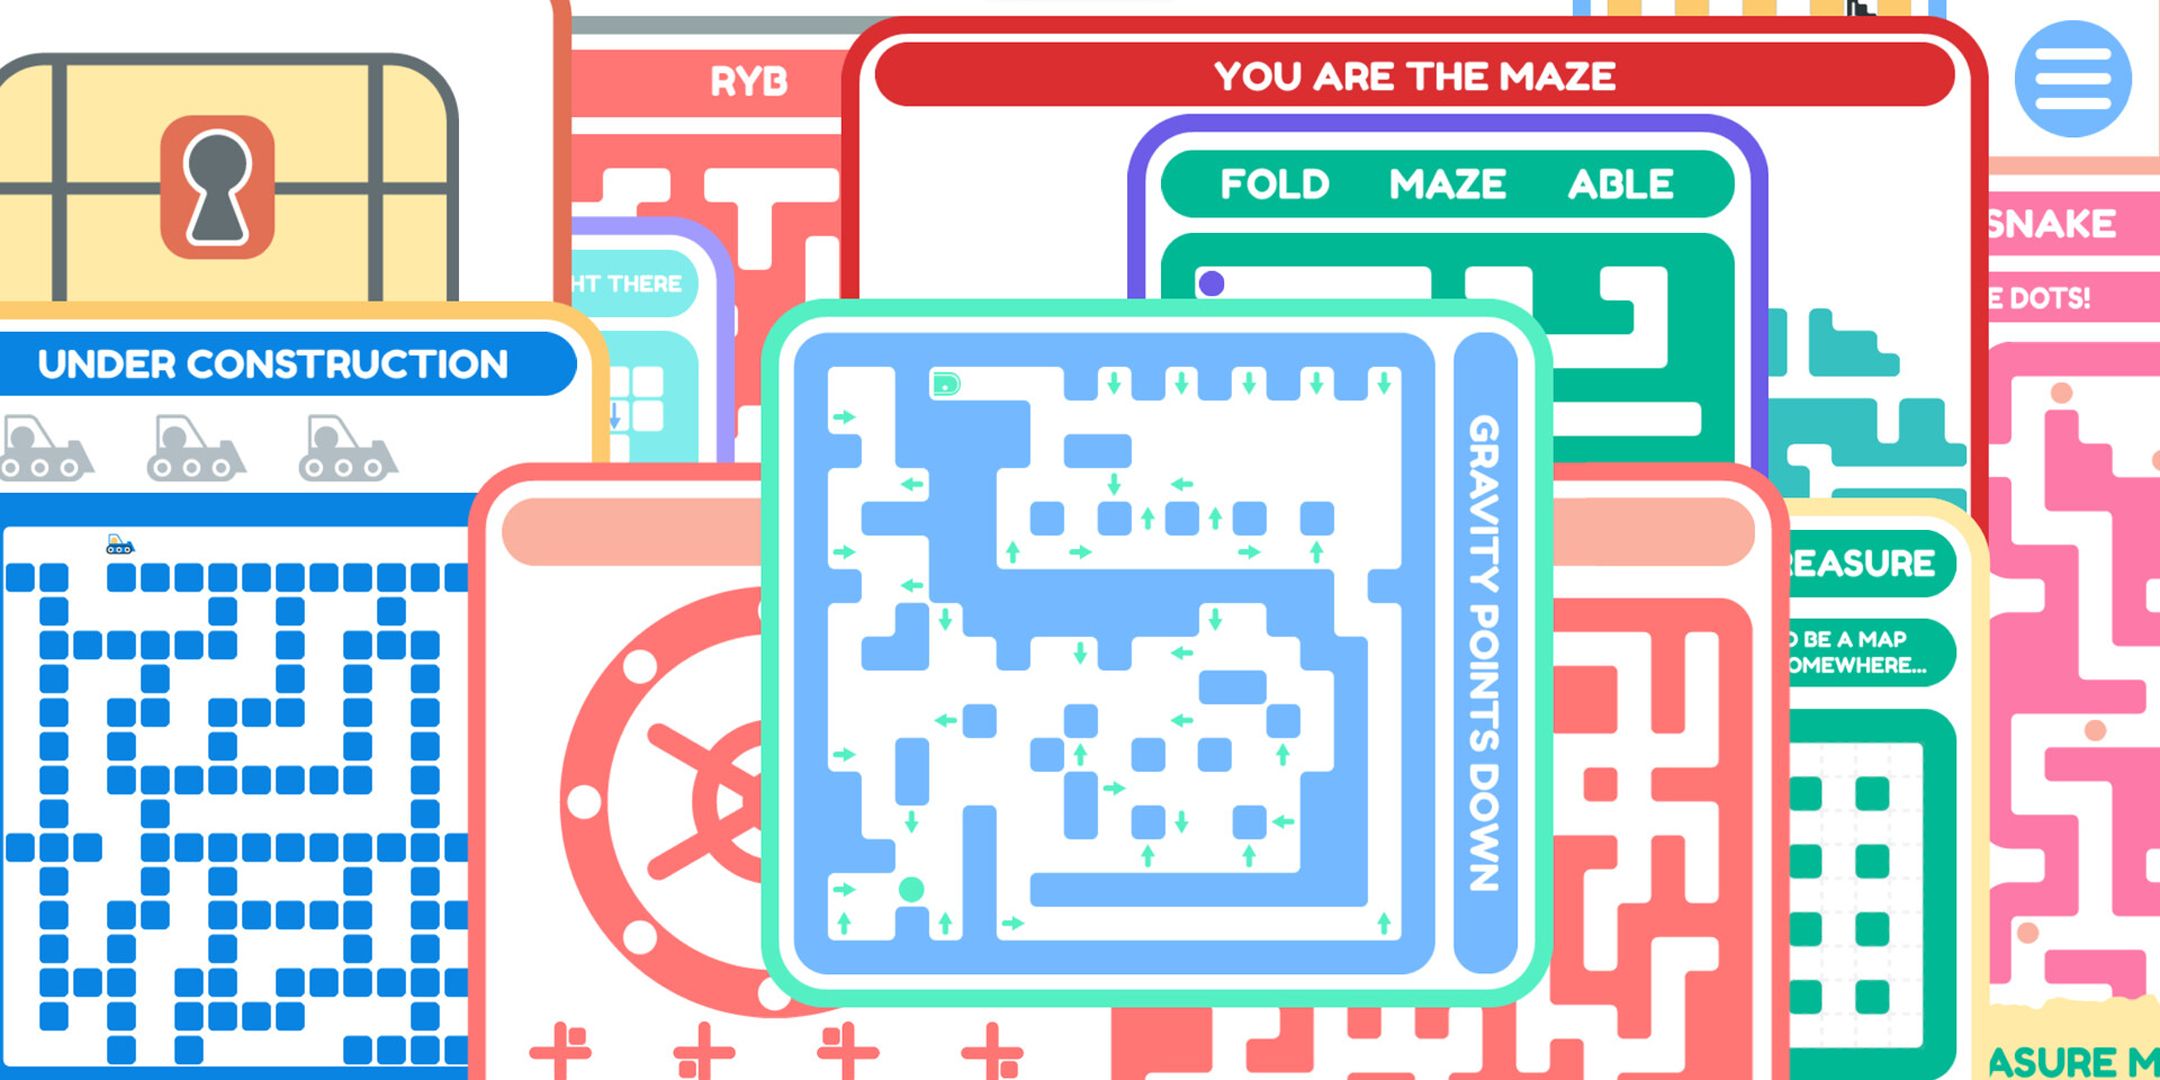 Various mazes of different colors and types overlapping in 20 Small Mazes.